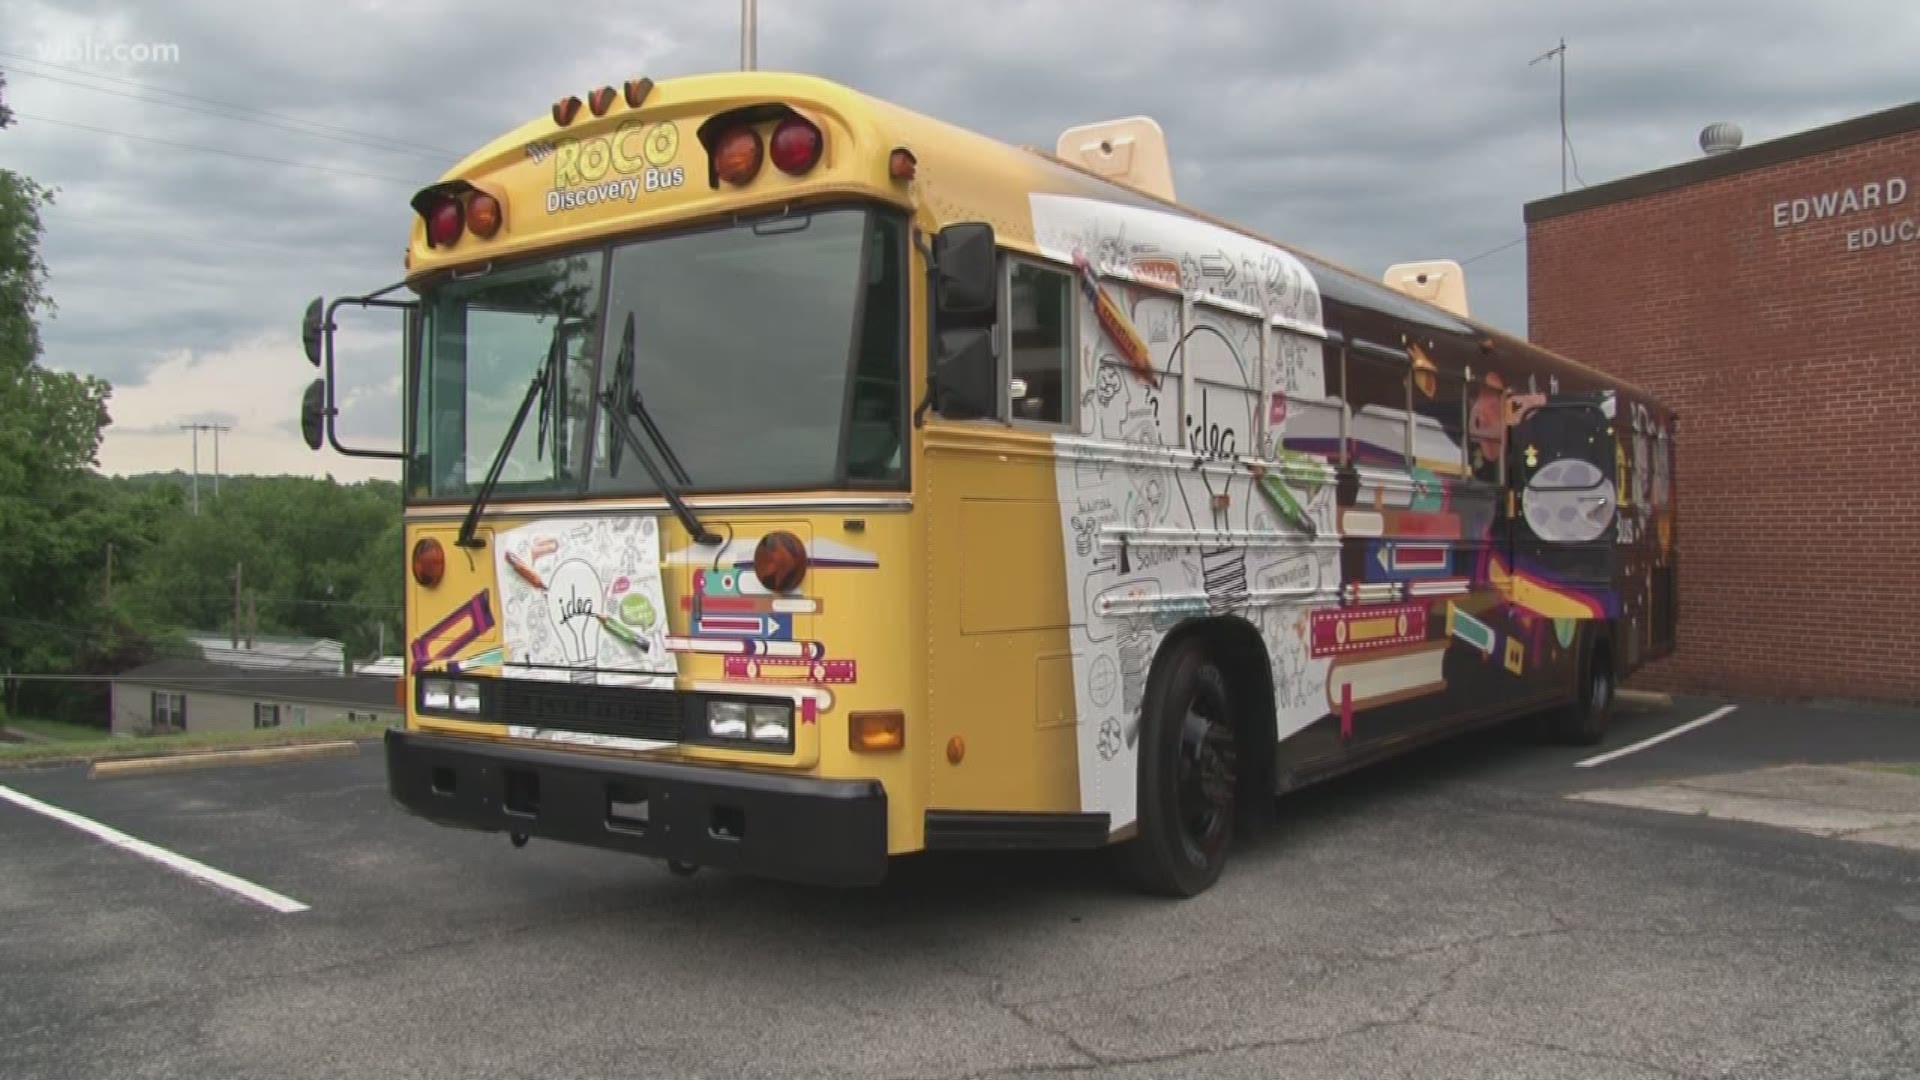 A bus will soon travel to Roane County neighborhoods to teach kids about reading and science.